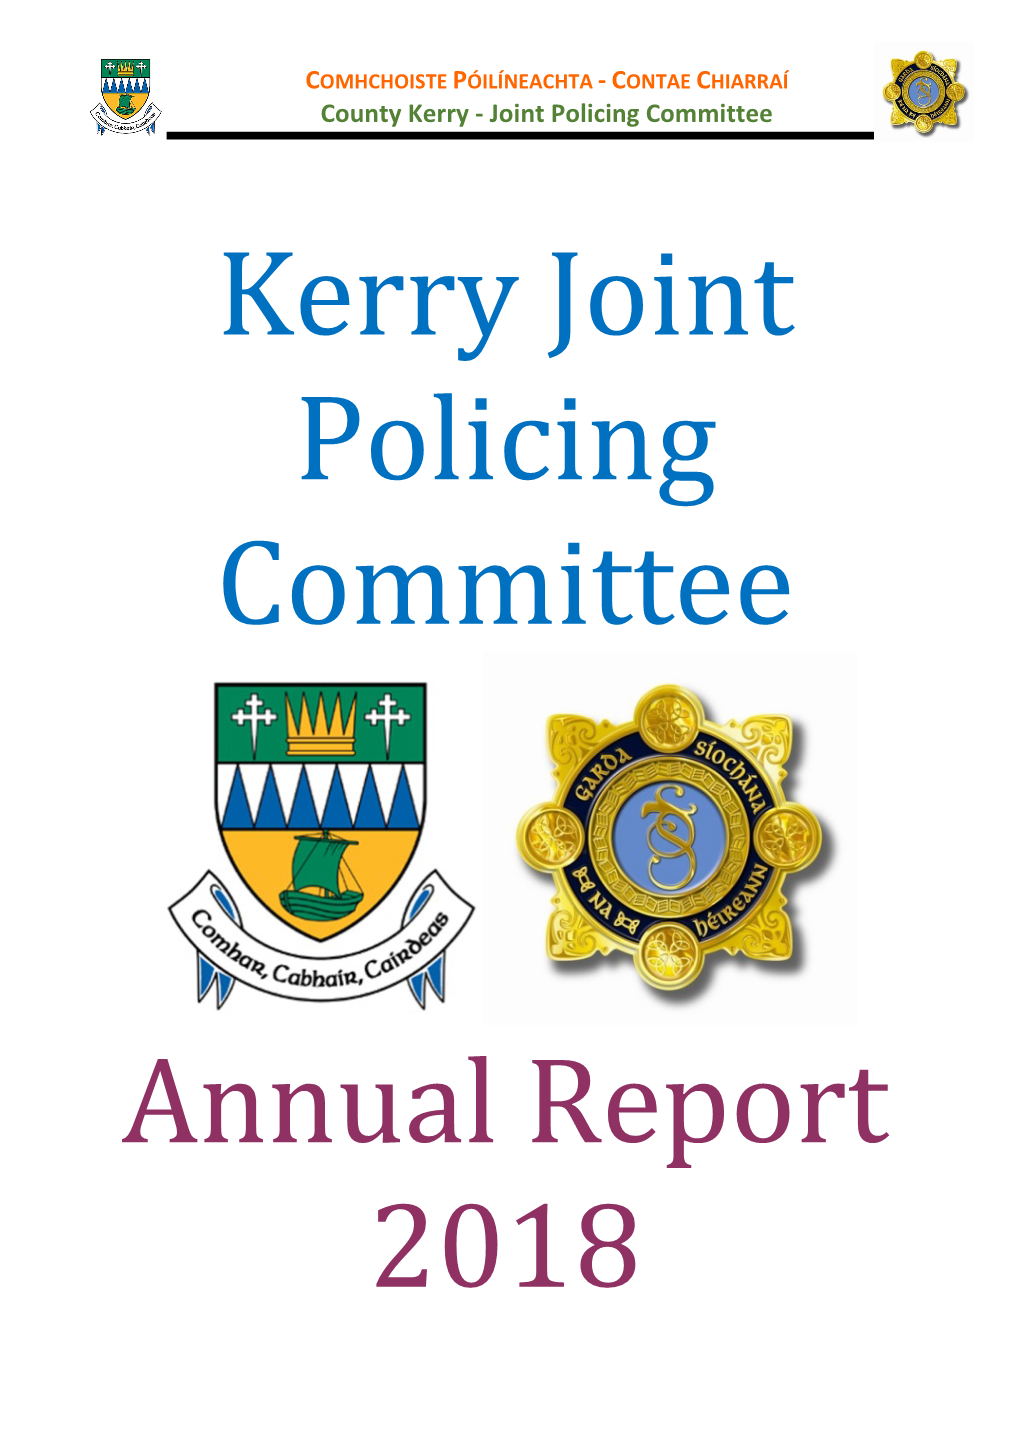 Kerry Joint Policing Committee- Strategy 2016-2020